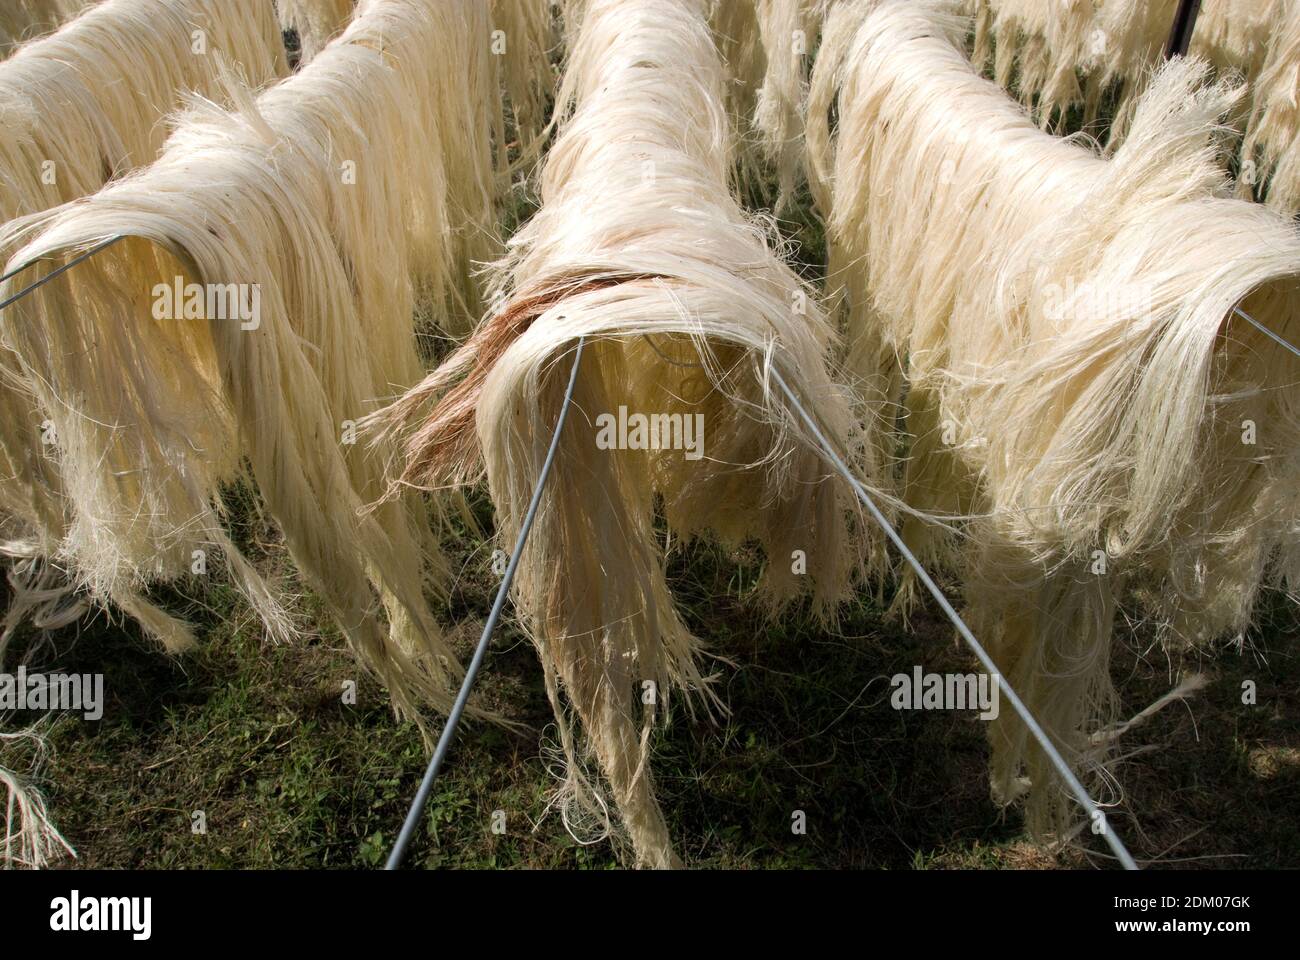 Henequen fibers, dry in the sun before being made into rope and twine, at the Hacienda Sotuta de Peon, Yucatan, Mexico. Stock Photo